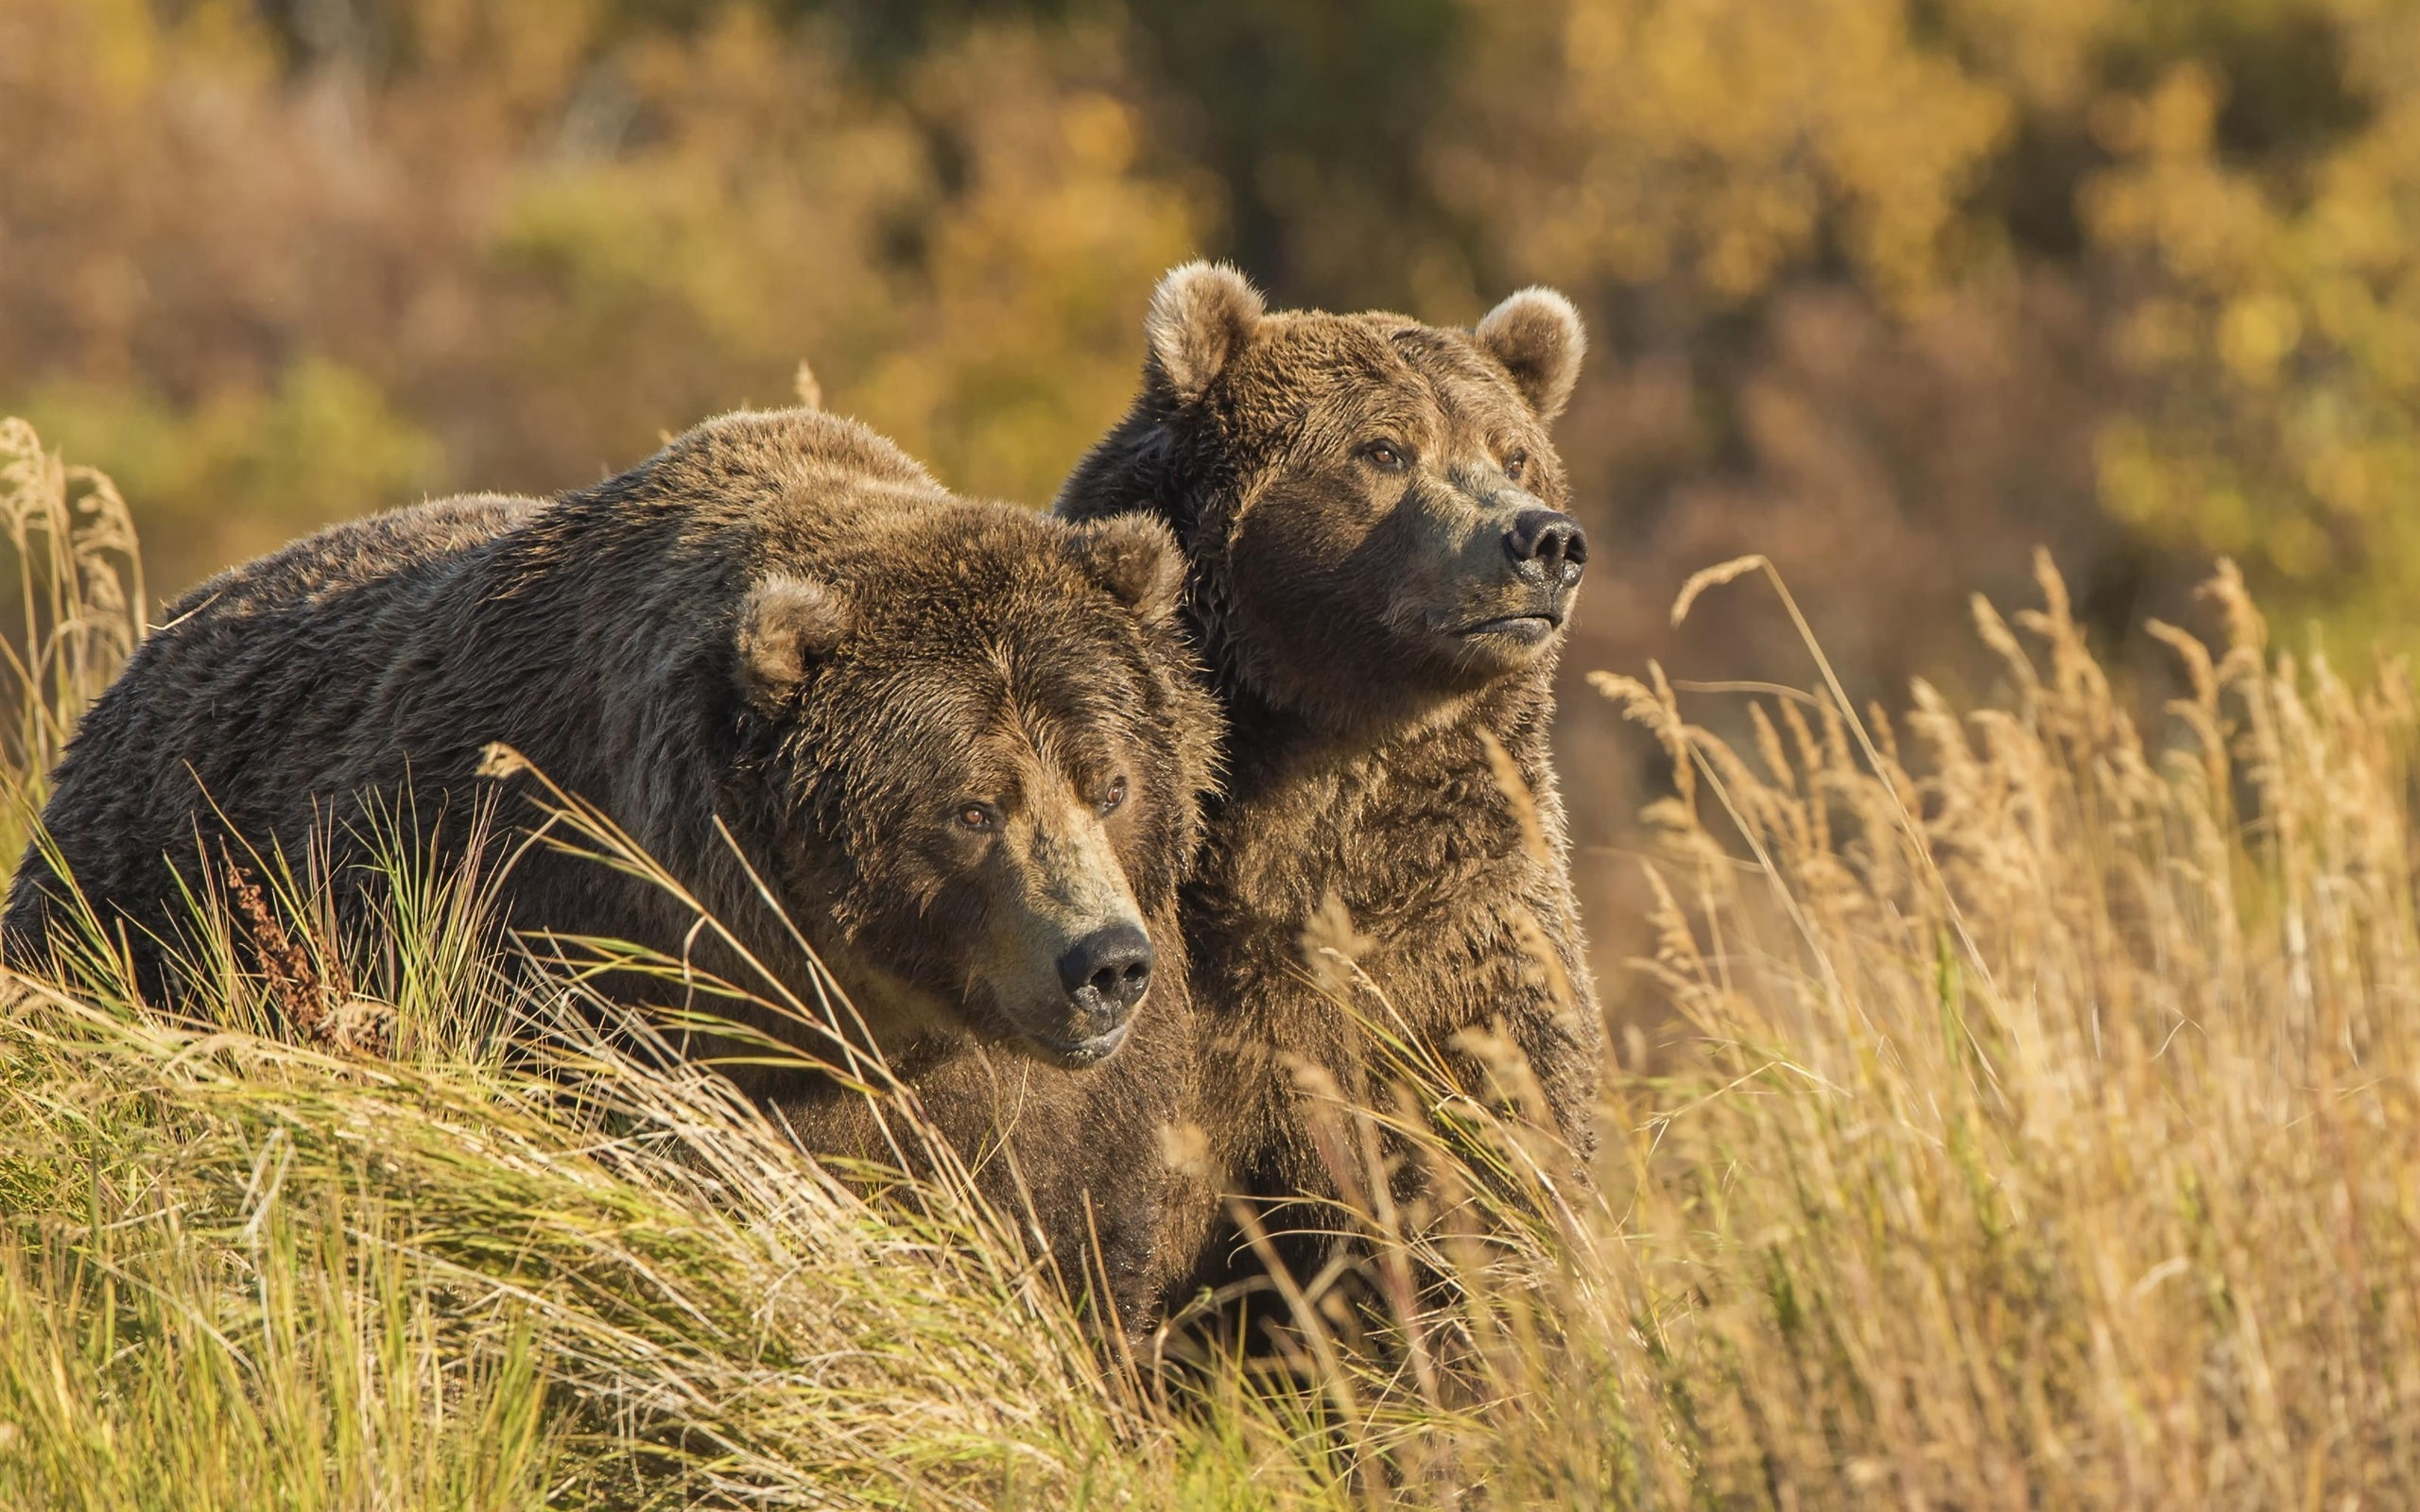 Two grizzly in the grass, bears